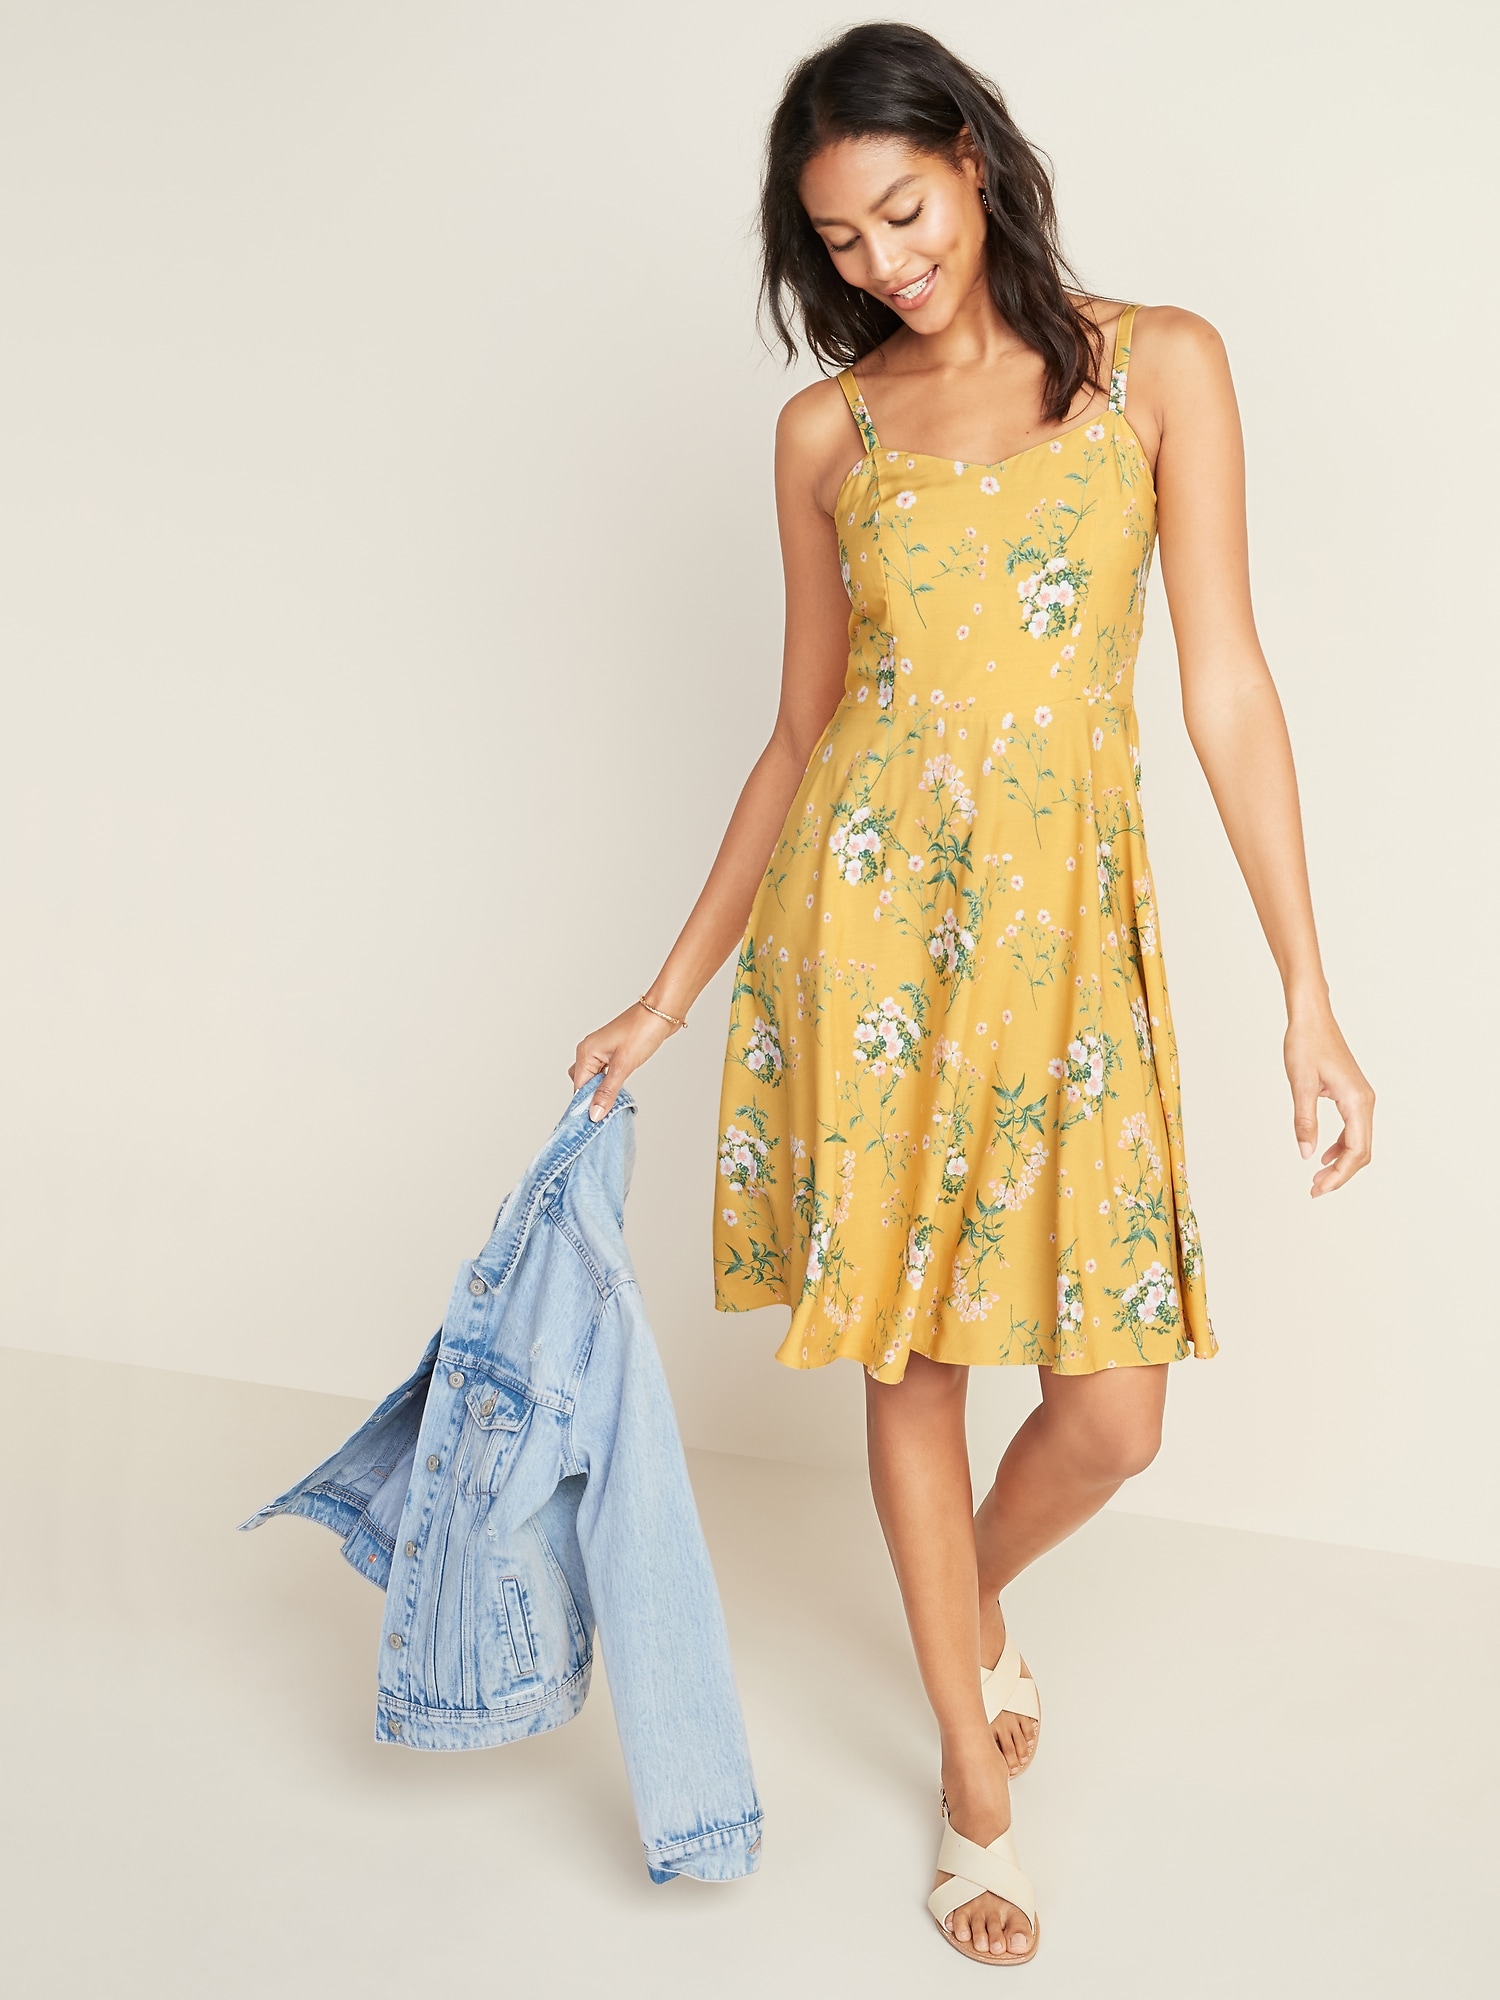 Old Navy New Arrival Dresses on Sale ...